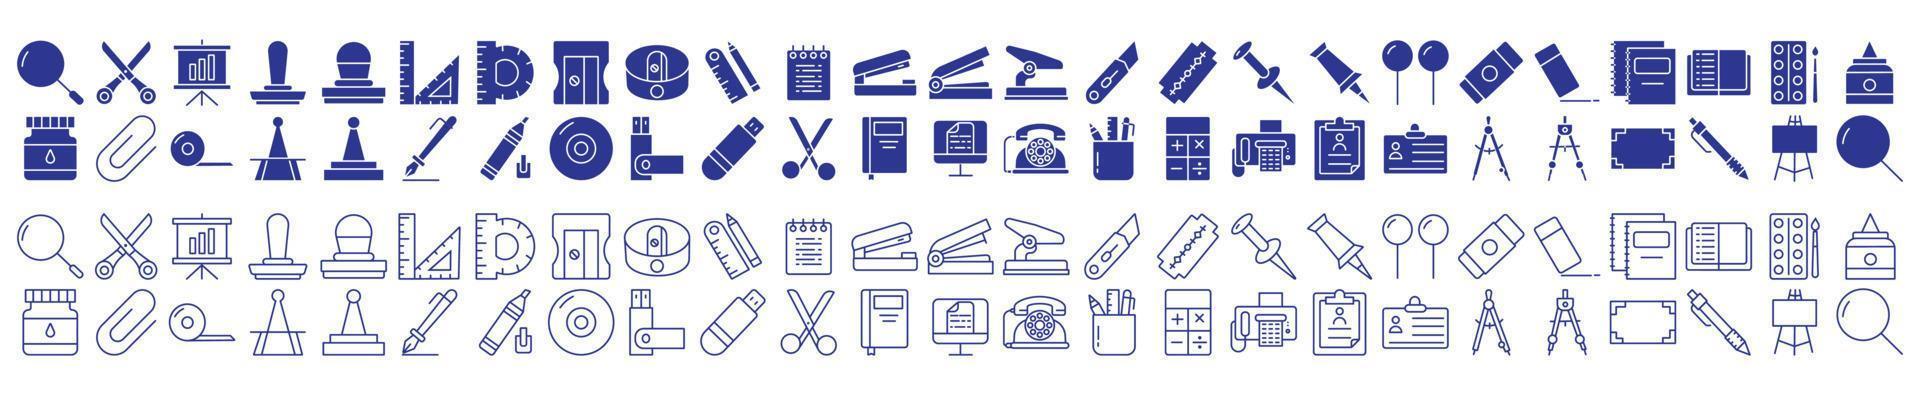 Collection of icons related to Stationery and craft items, including icons like Pen, Magnifier, Scissor, Pencil and more. vector illustrations, Pixel Perfect